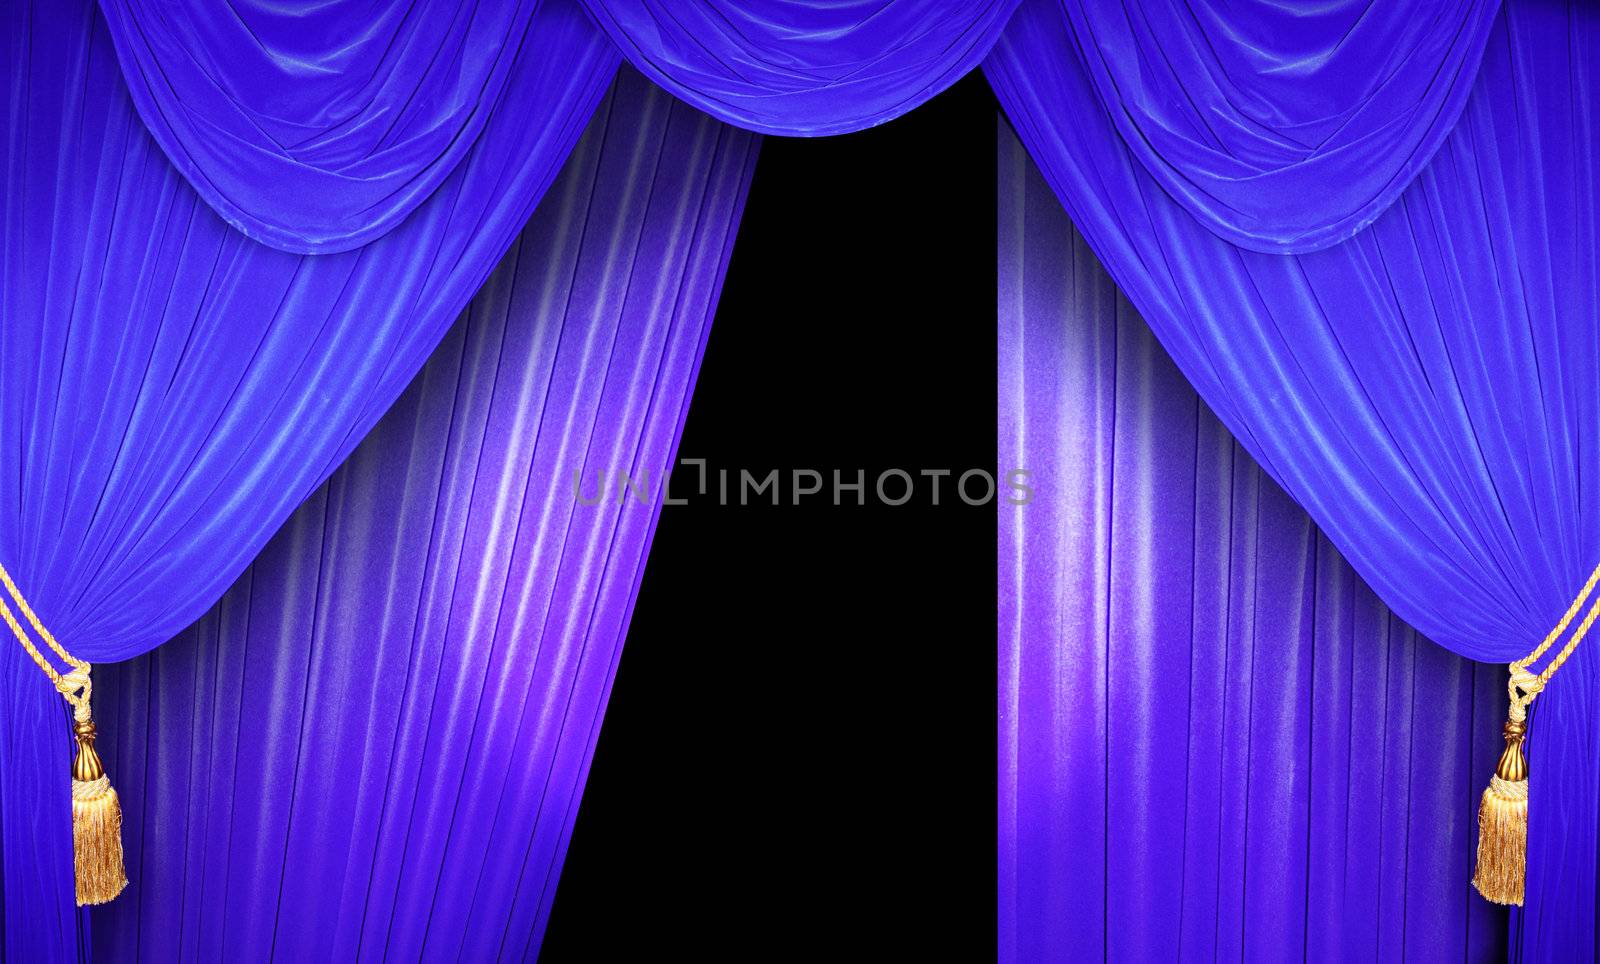 curtain of a classical theater 